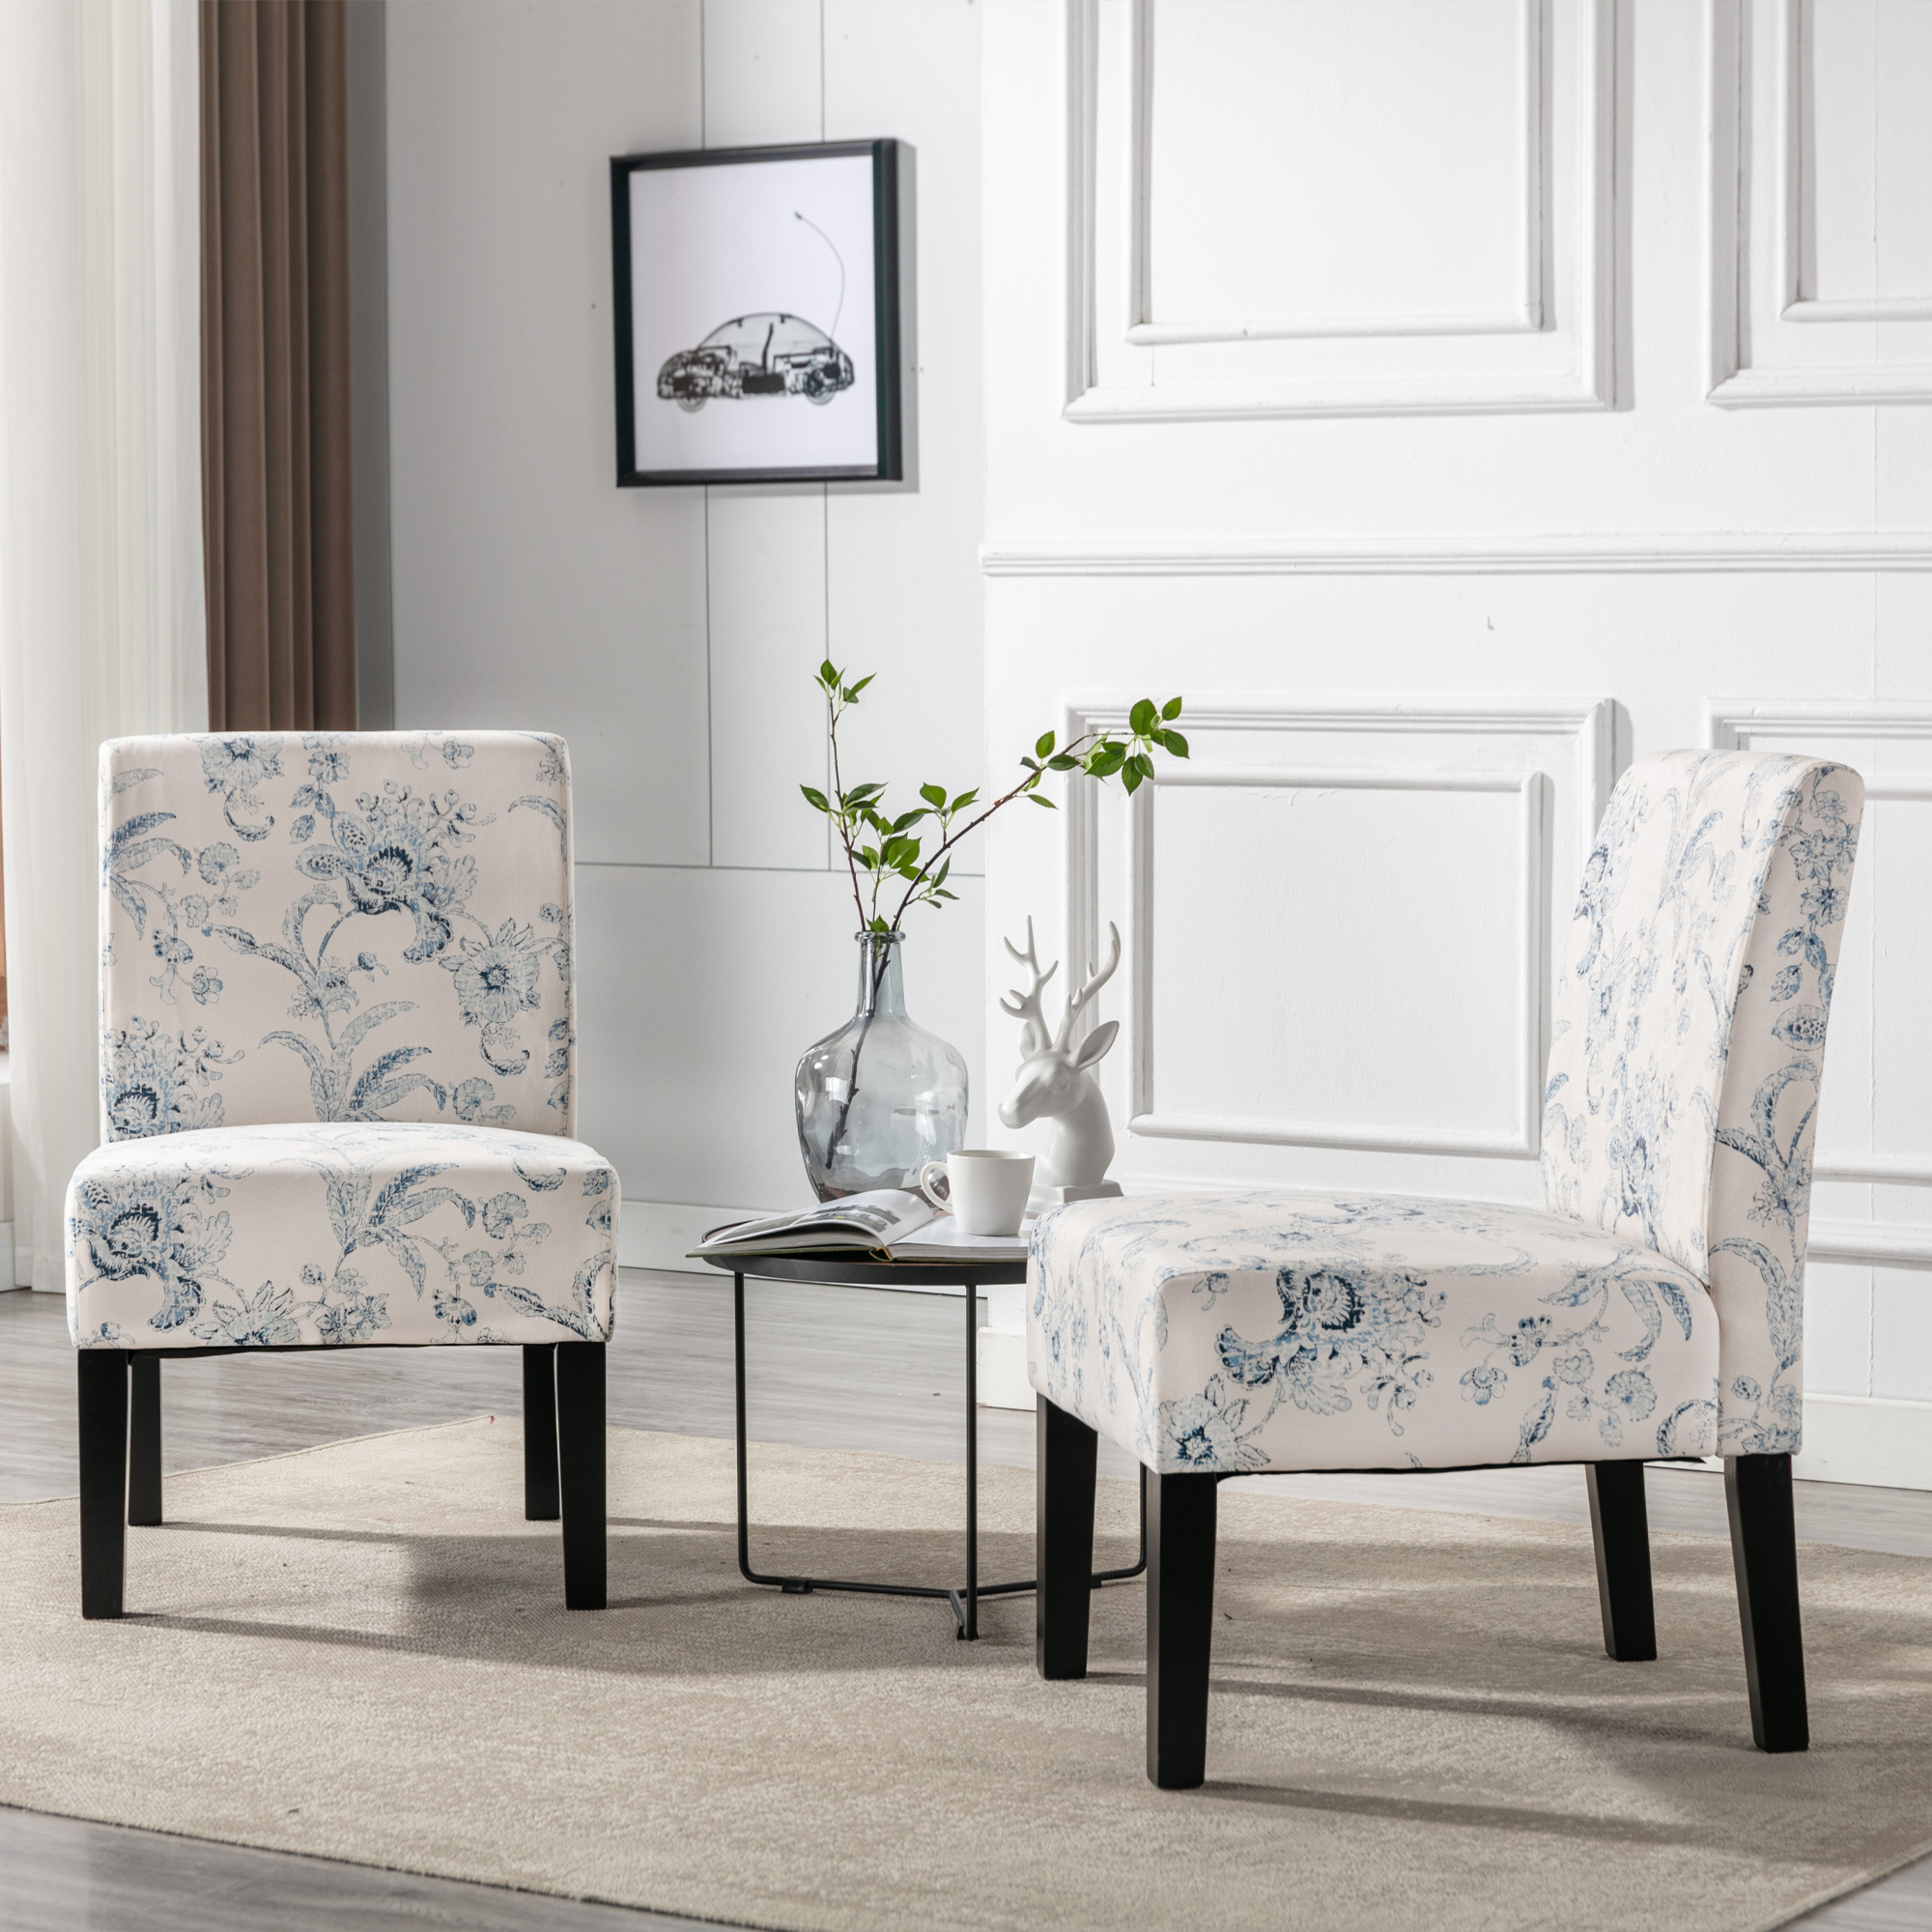 HengMing Traditional Fabric Accent Chair, Print, .Modern Slipper Side Chairs for Living Room Bedroom/Home Office, White/Blue/Floral，Set of 2.